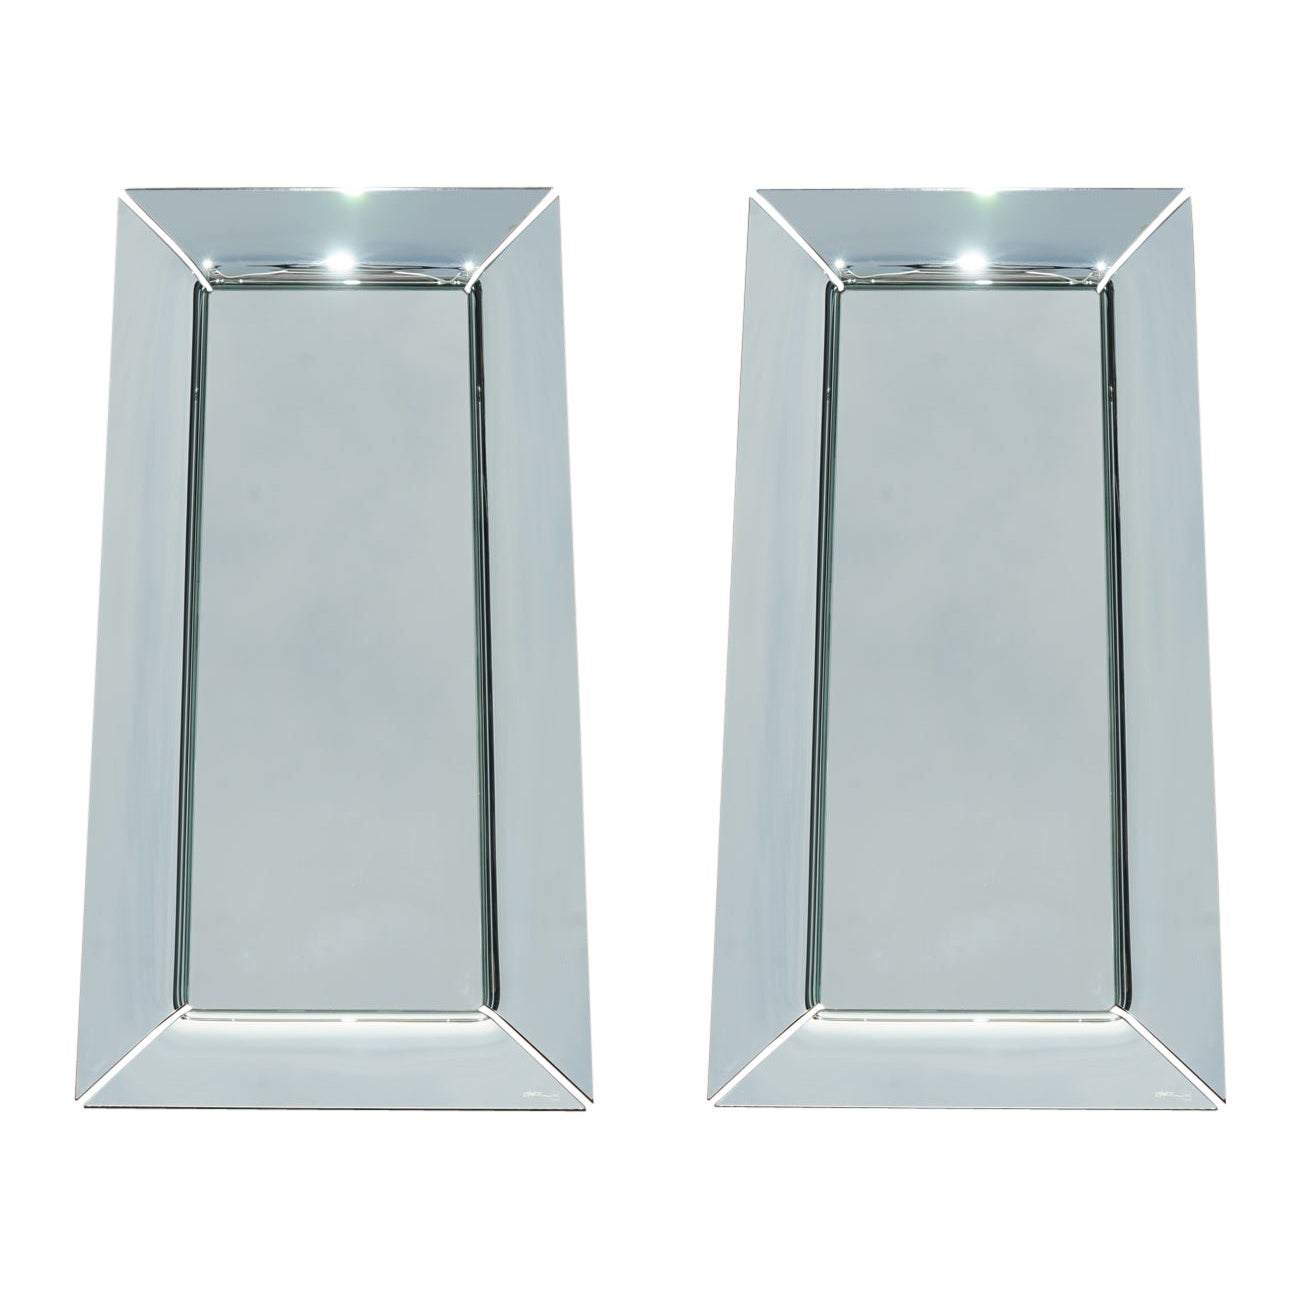 PAIR OF SUBLIME DESIGNER PHILIPPE STARCK FIAM CAADRE WALL MiRRORS 155CM TALL For Sale